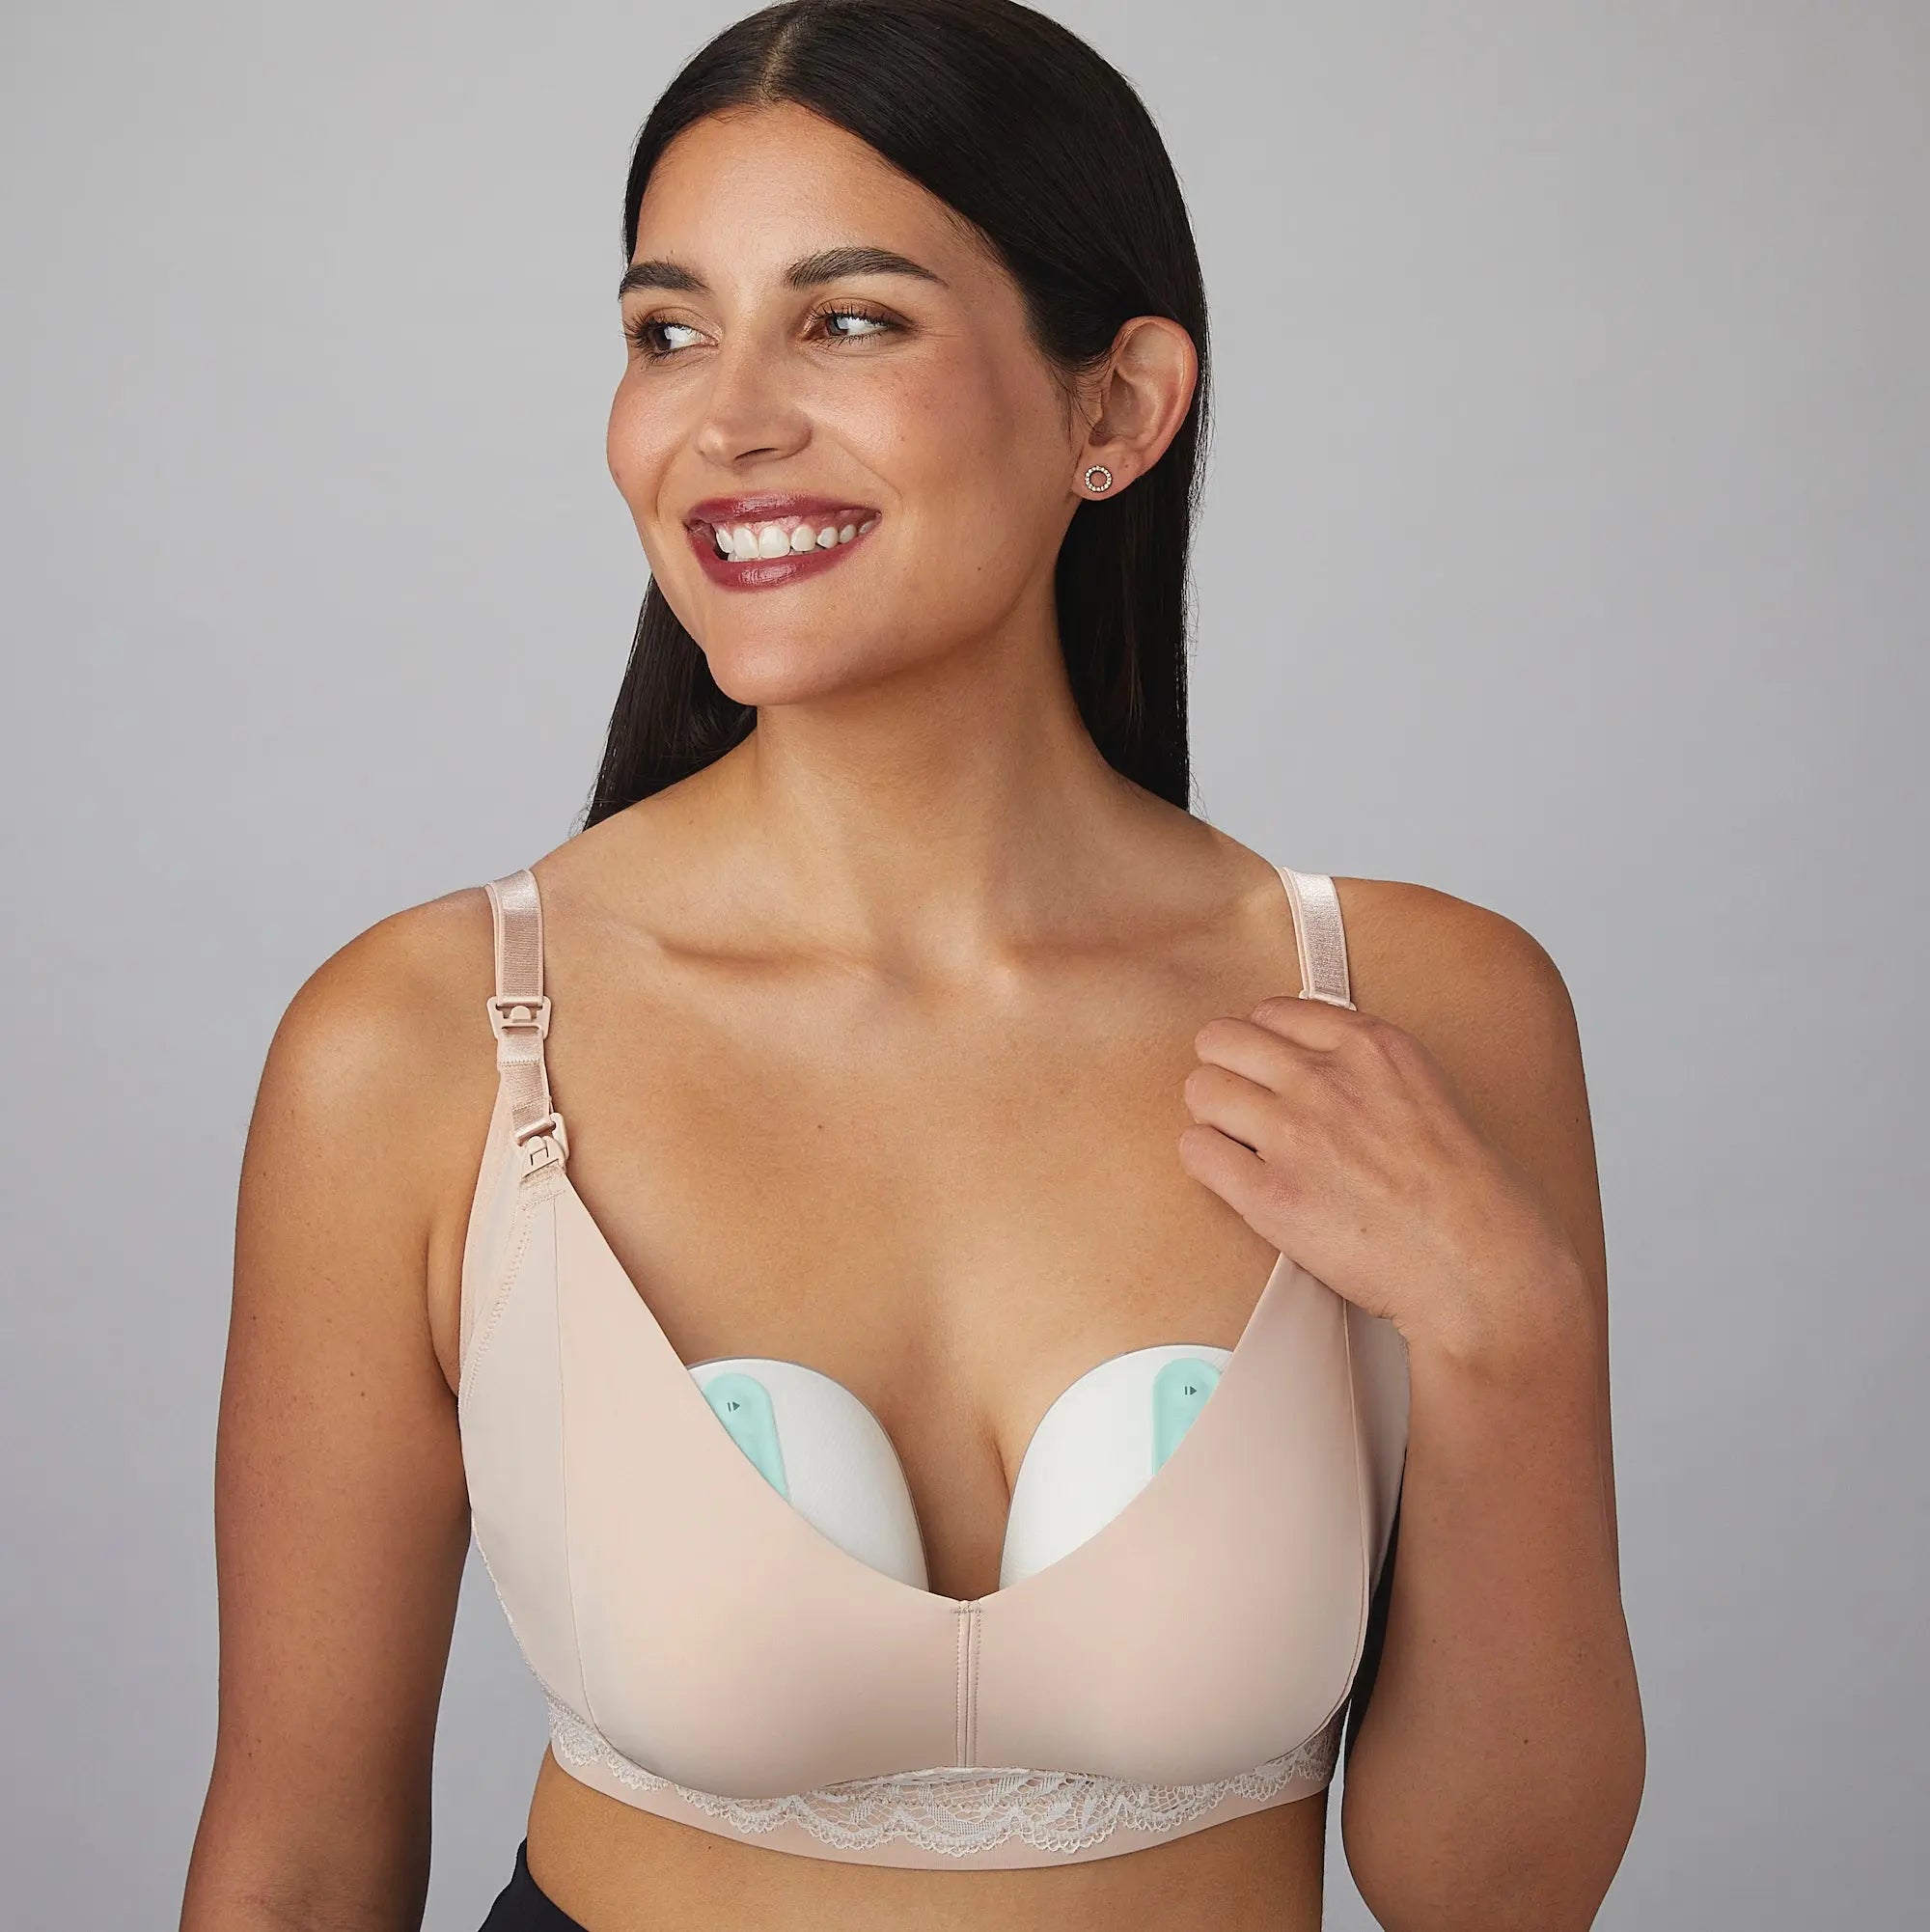 Luxe pumping bra champagne image from the front, woman lounging